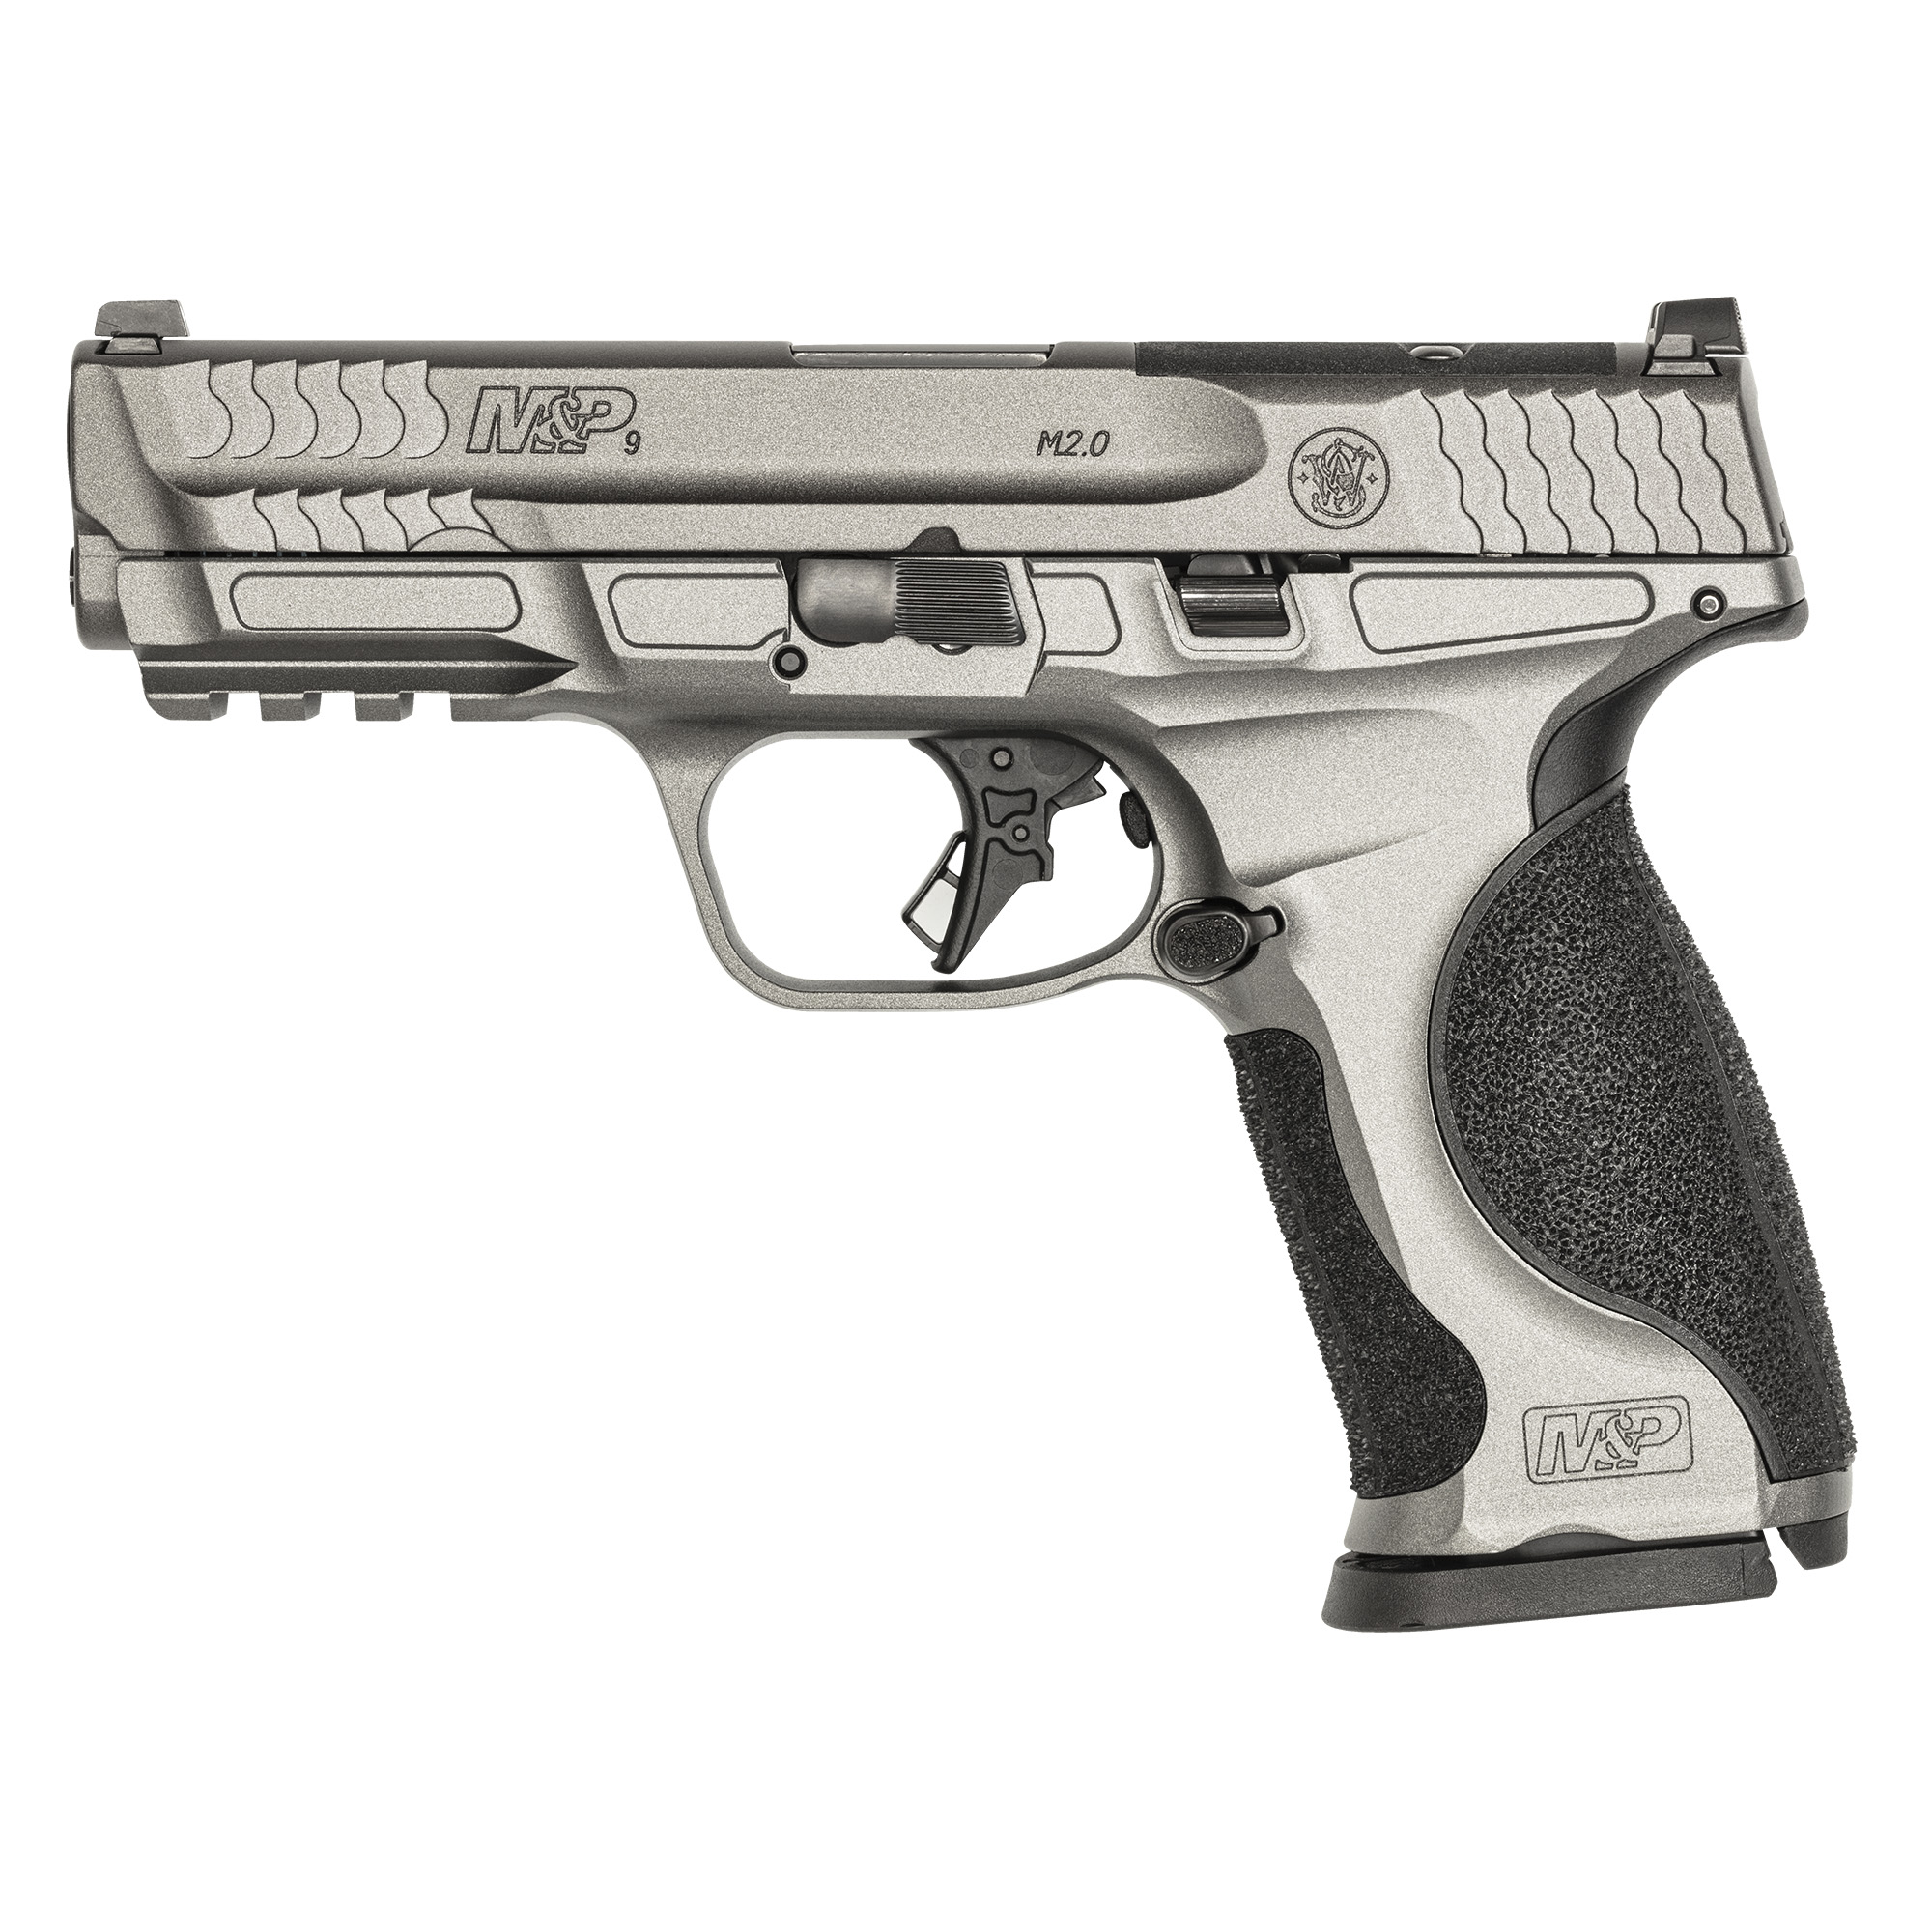 https://cityarsenal.com/product/smith-wesson-mp-m2-0-metal-frame-pistol-optic-ready-tungsten-gray-finish-13194/